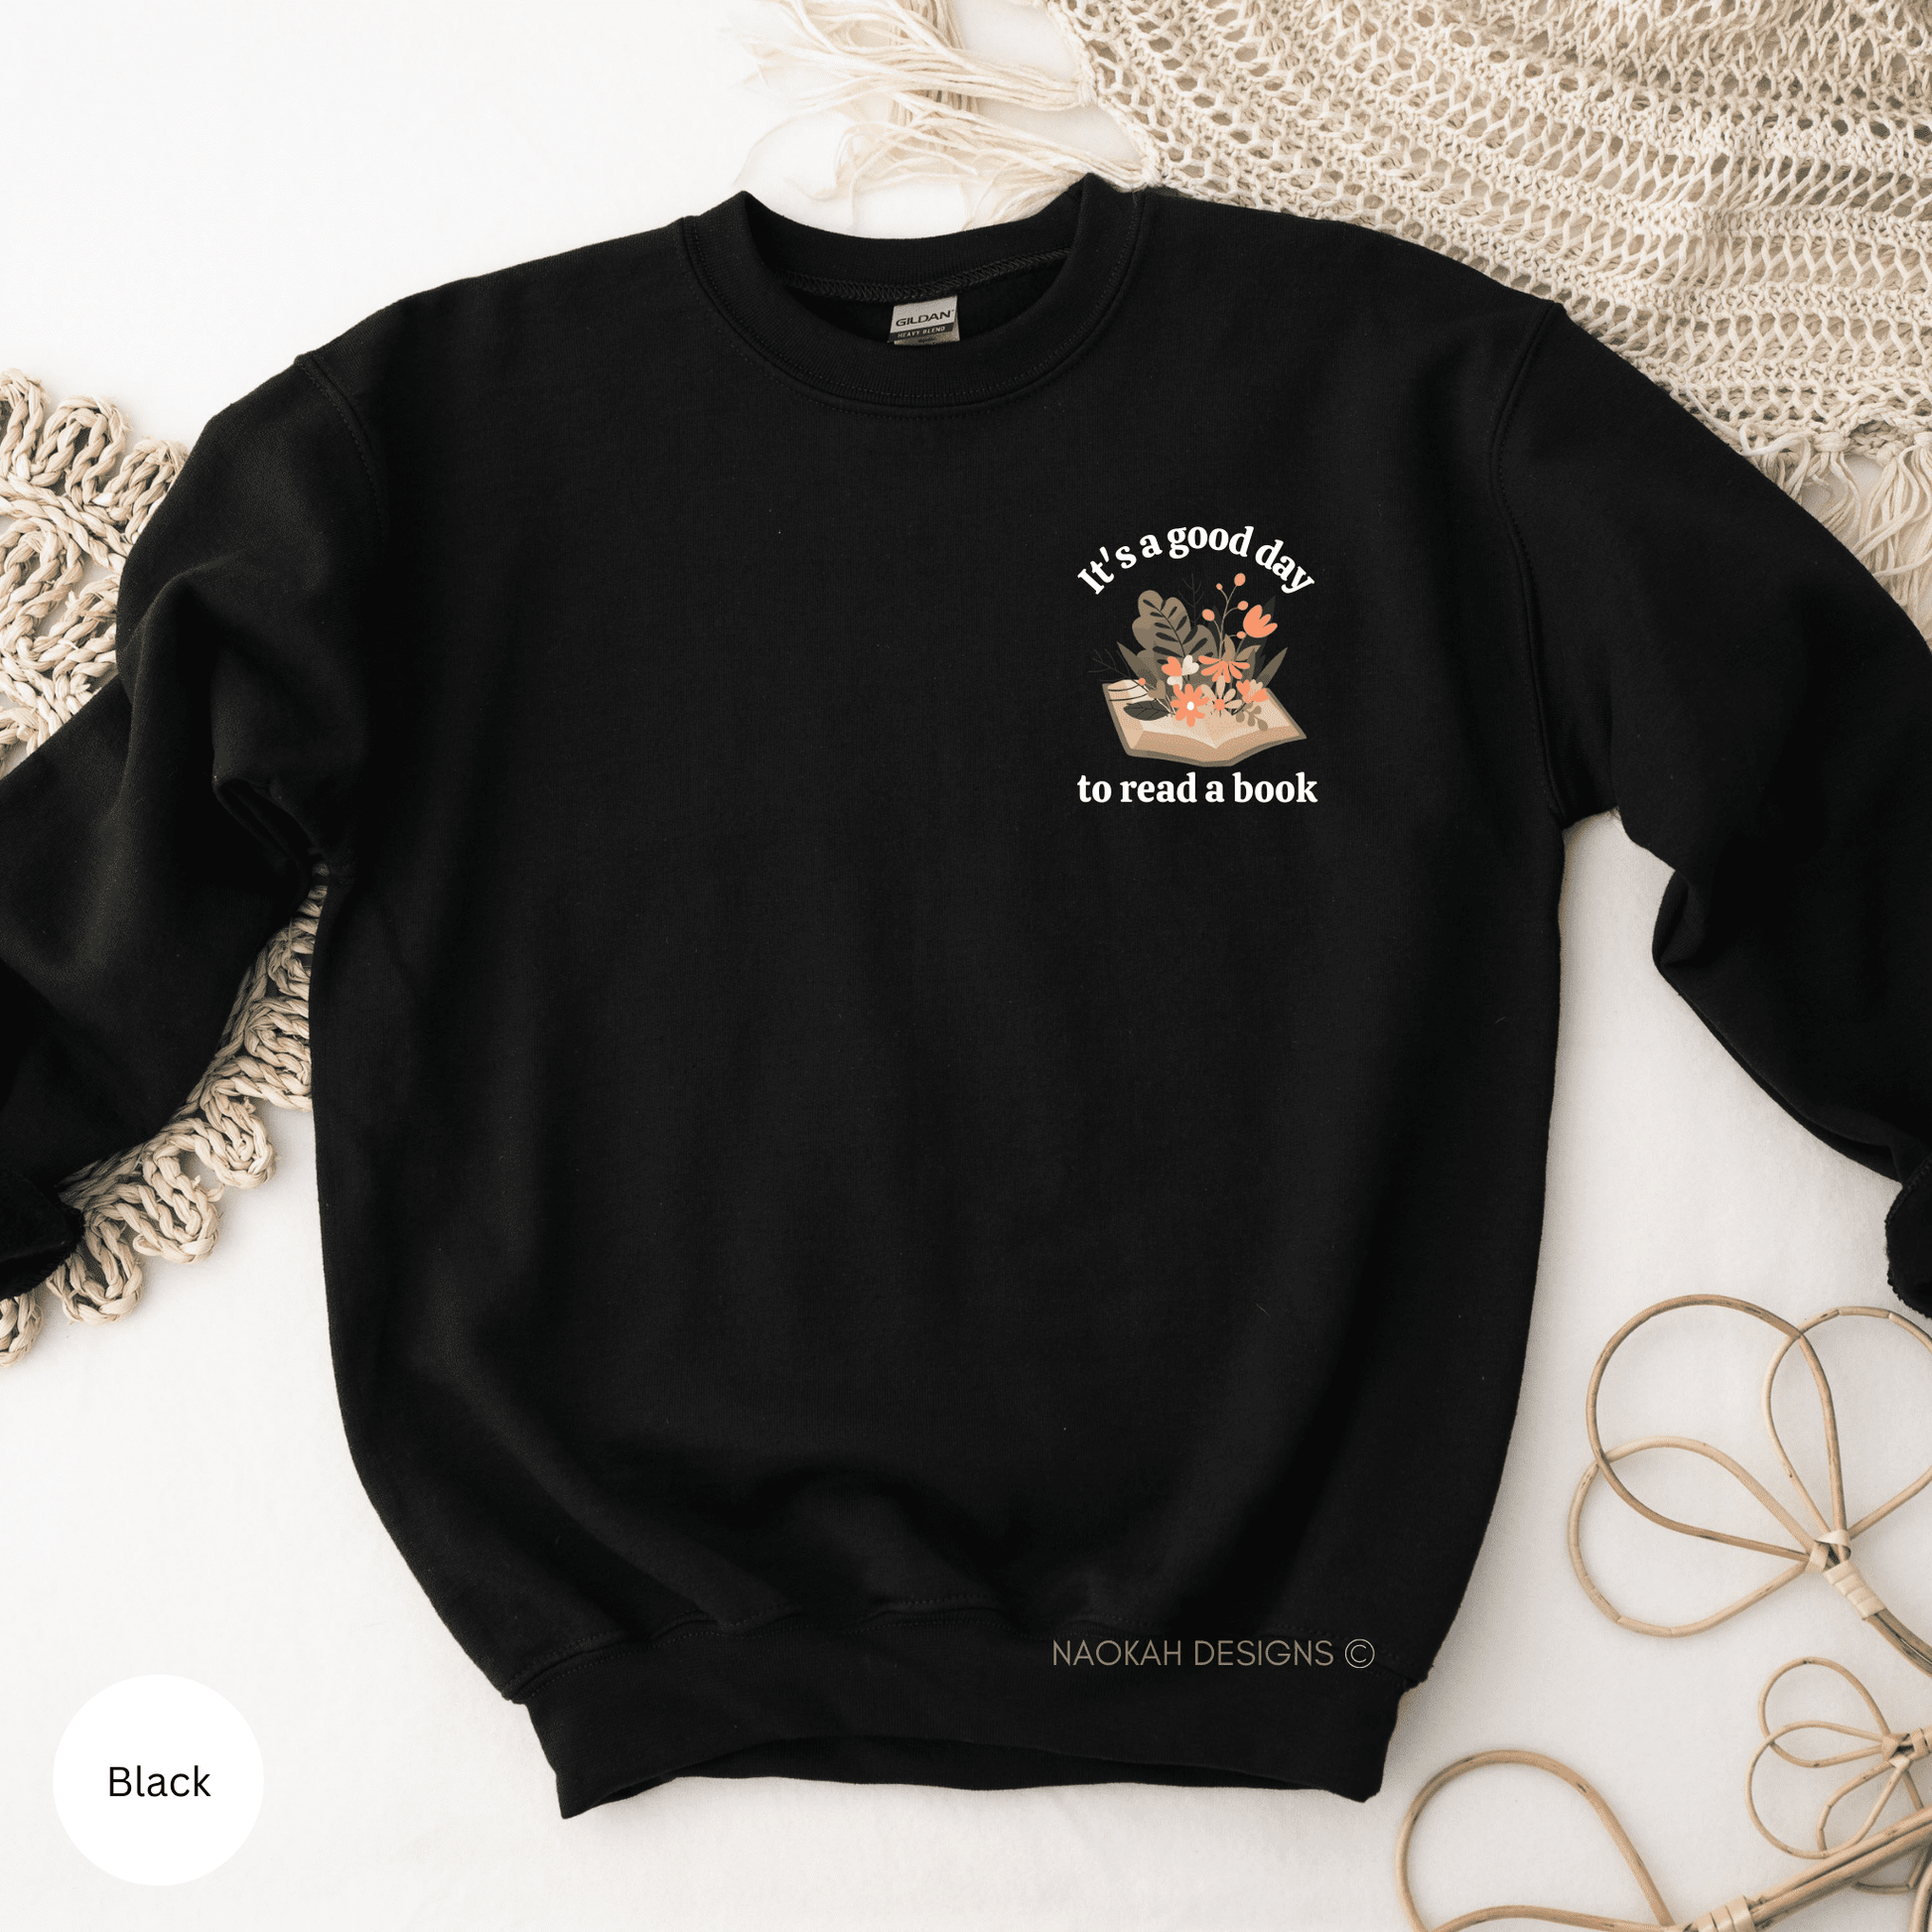 It's A Good Day To Read A Book Sweater, Reading Shirt, Gift for Teacher, Book Lover Gift For Women, Flower Book Lover, English Teacher, Literary Shirt, Bookish Shirt, Reading Shirt, Read Banned Books Shirt